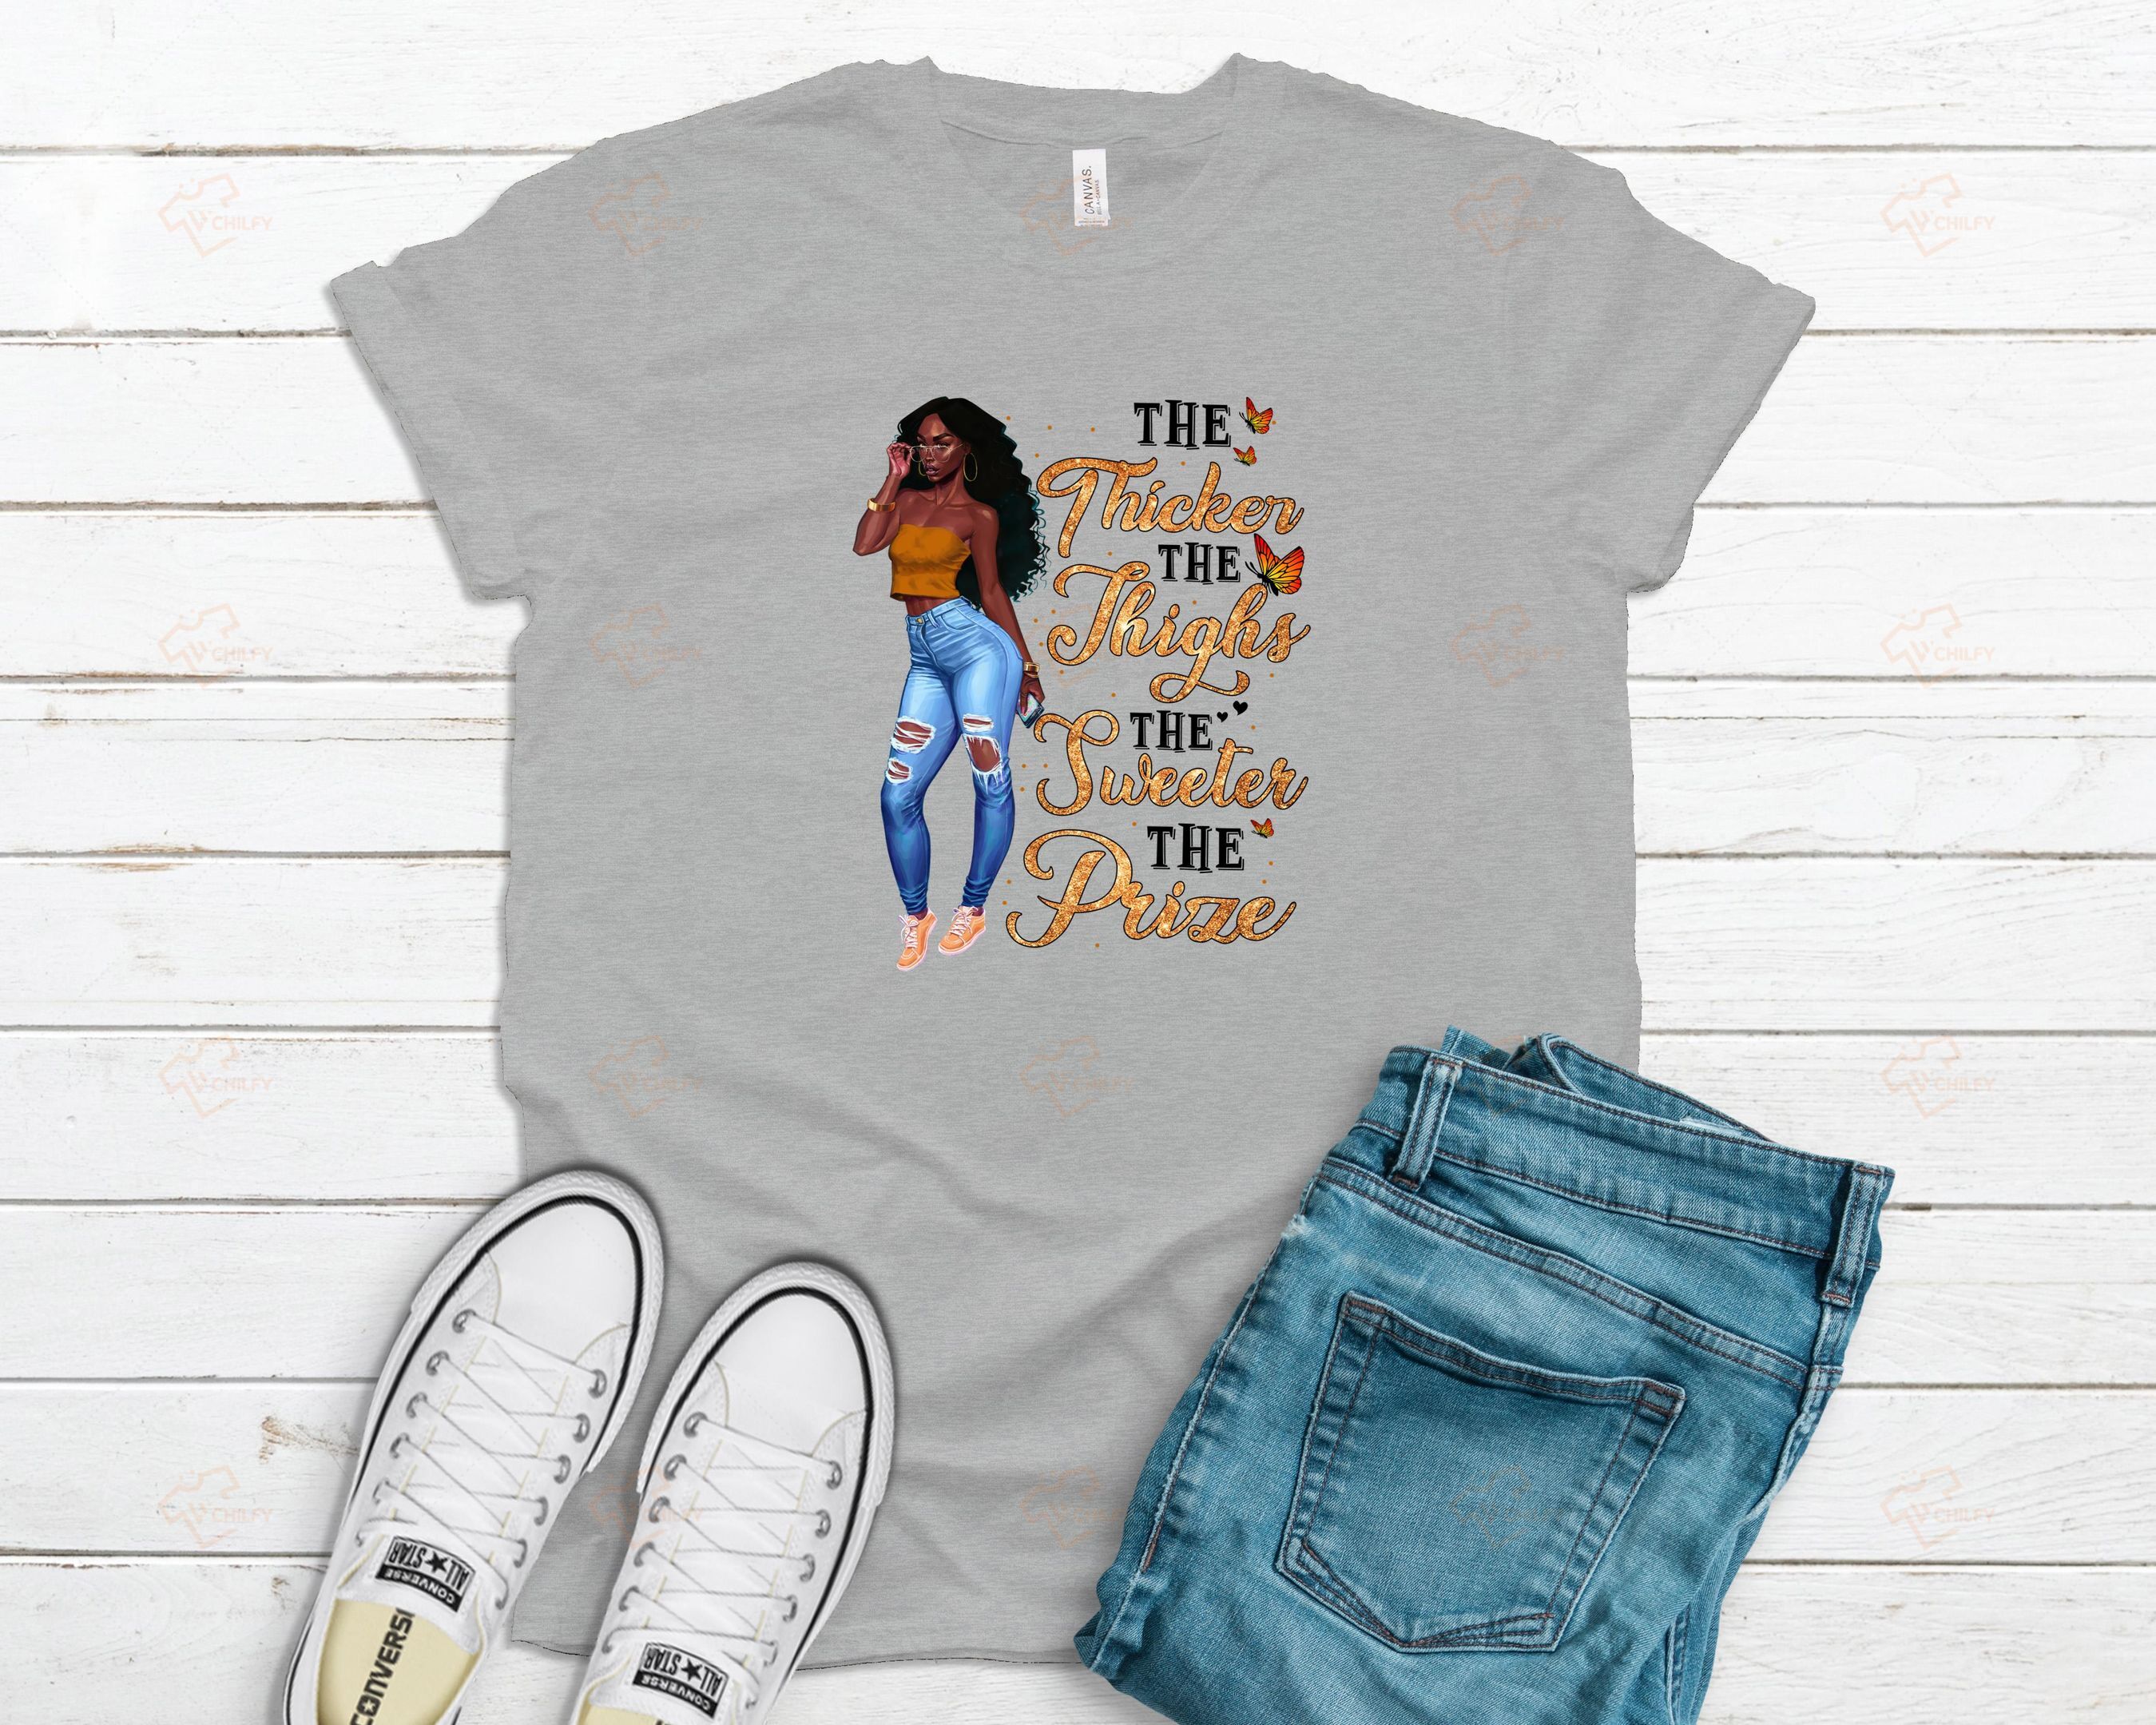 The thicker the thighs the sweeter the prize shirt, Black girl shirt